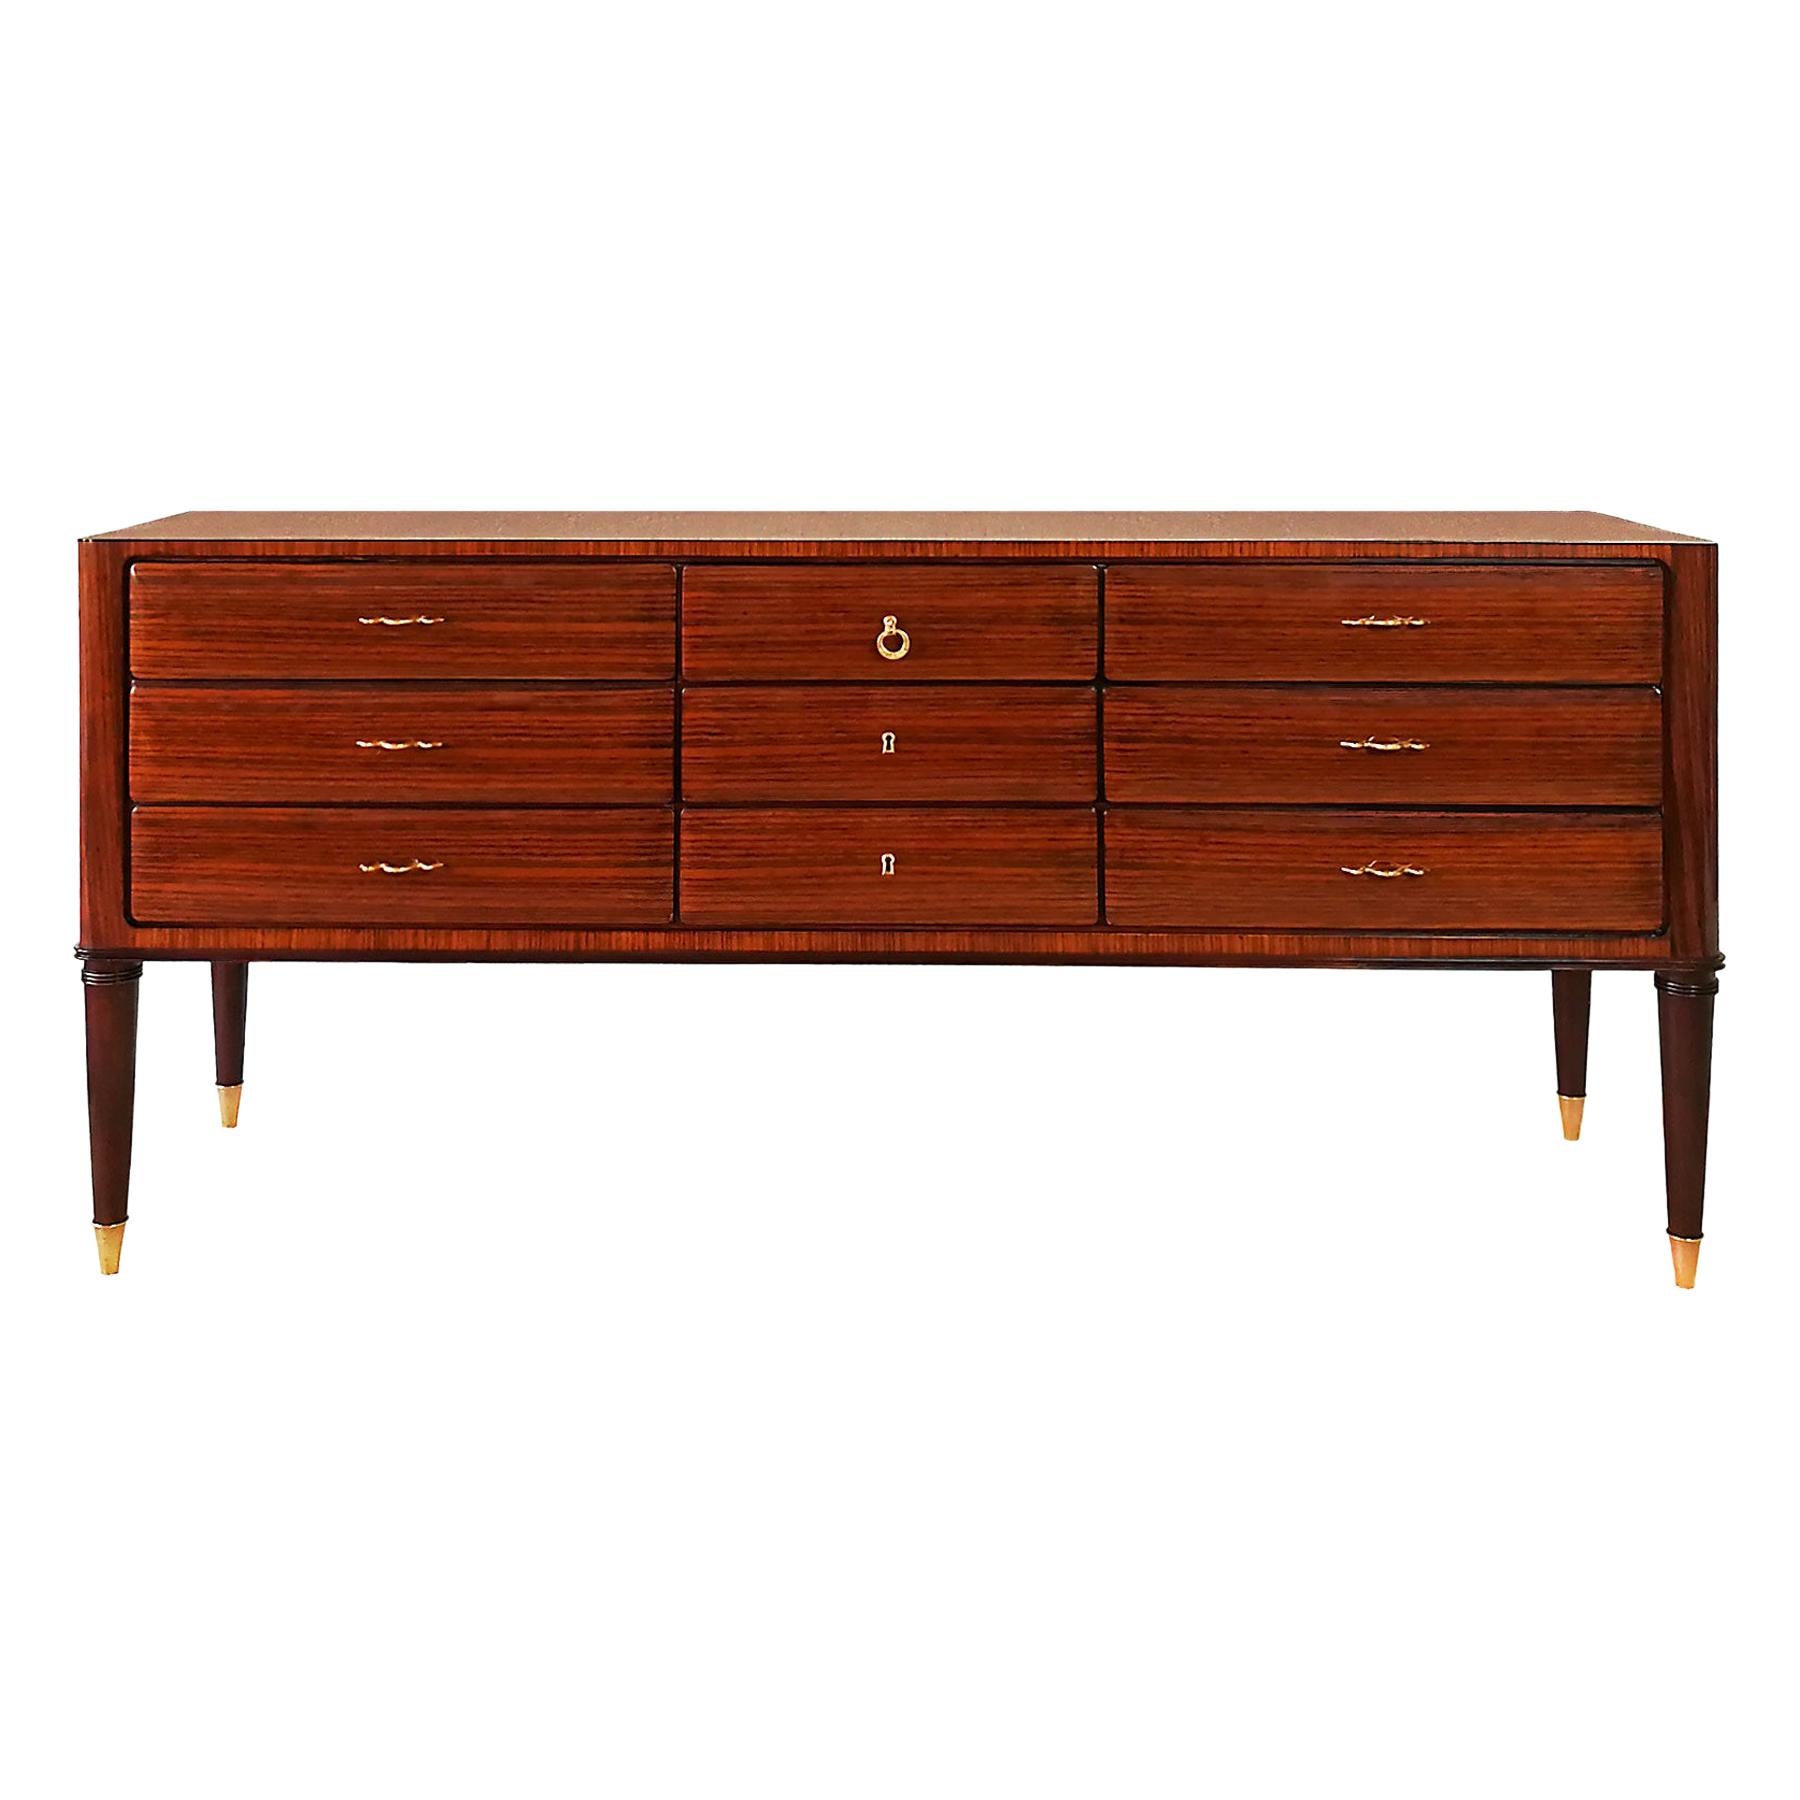 Large Mid-Century Modern Commode in Zebra Wood, Mahogany and Brass - Italy For Sale